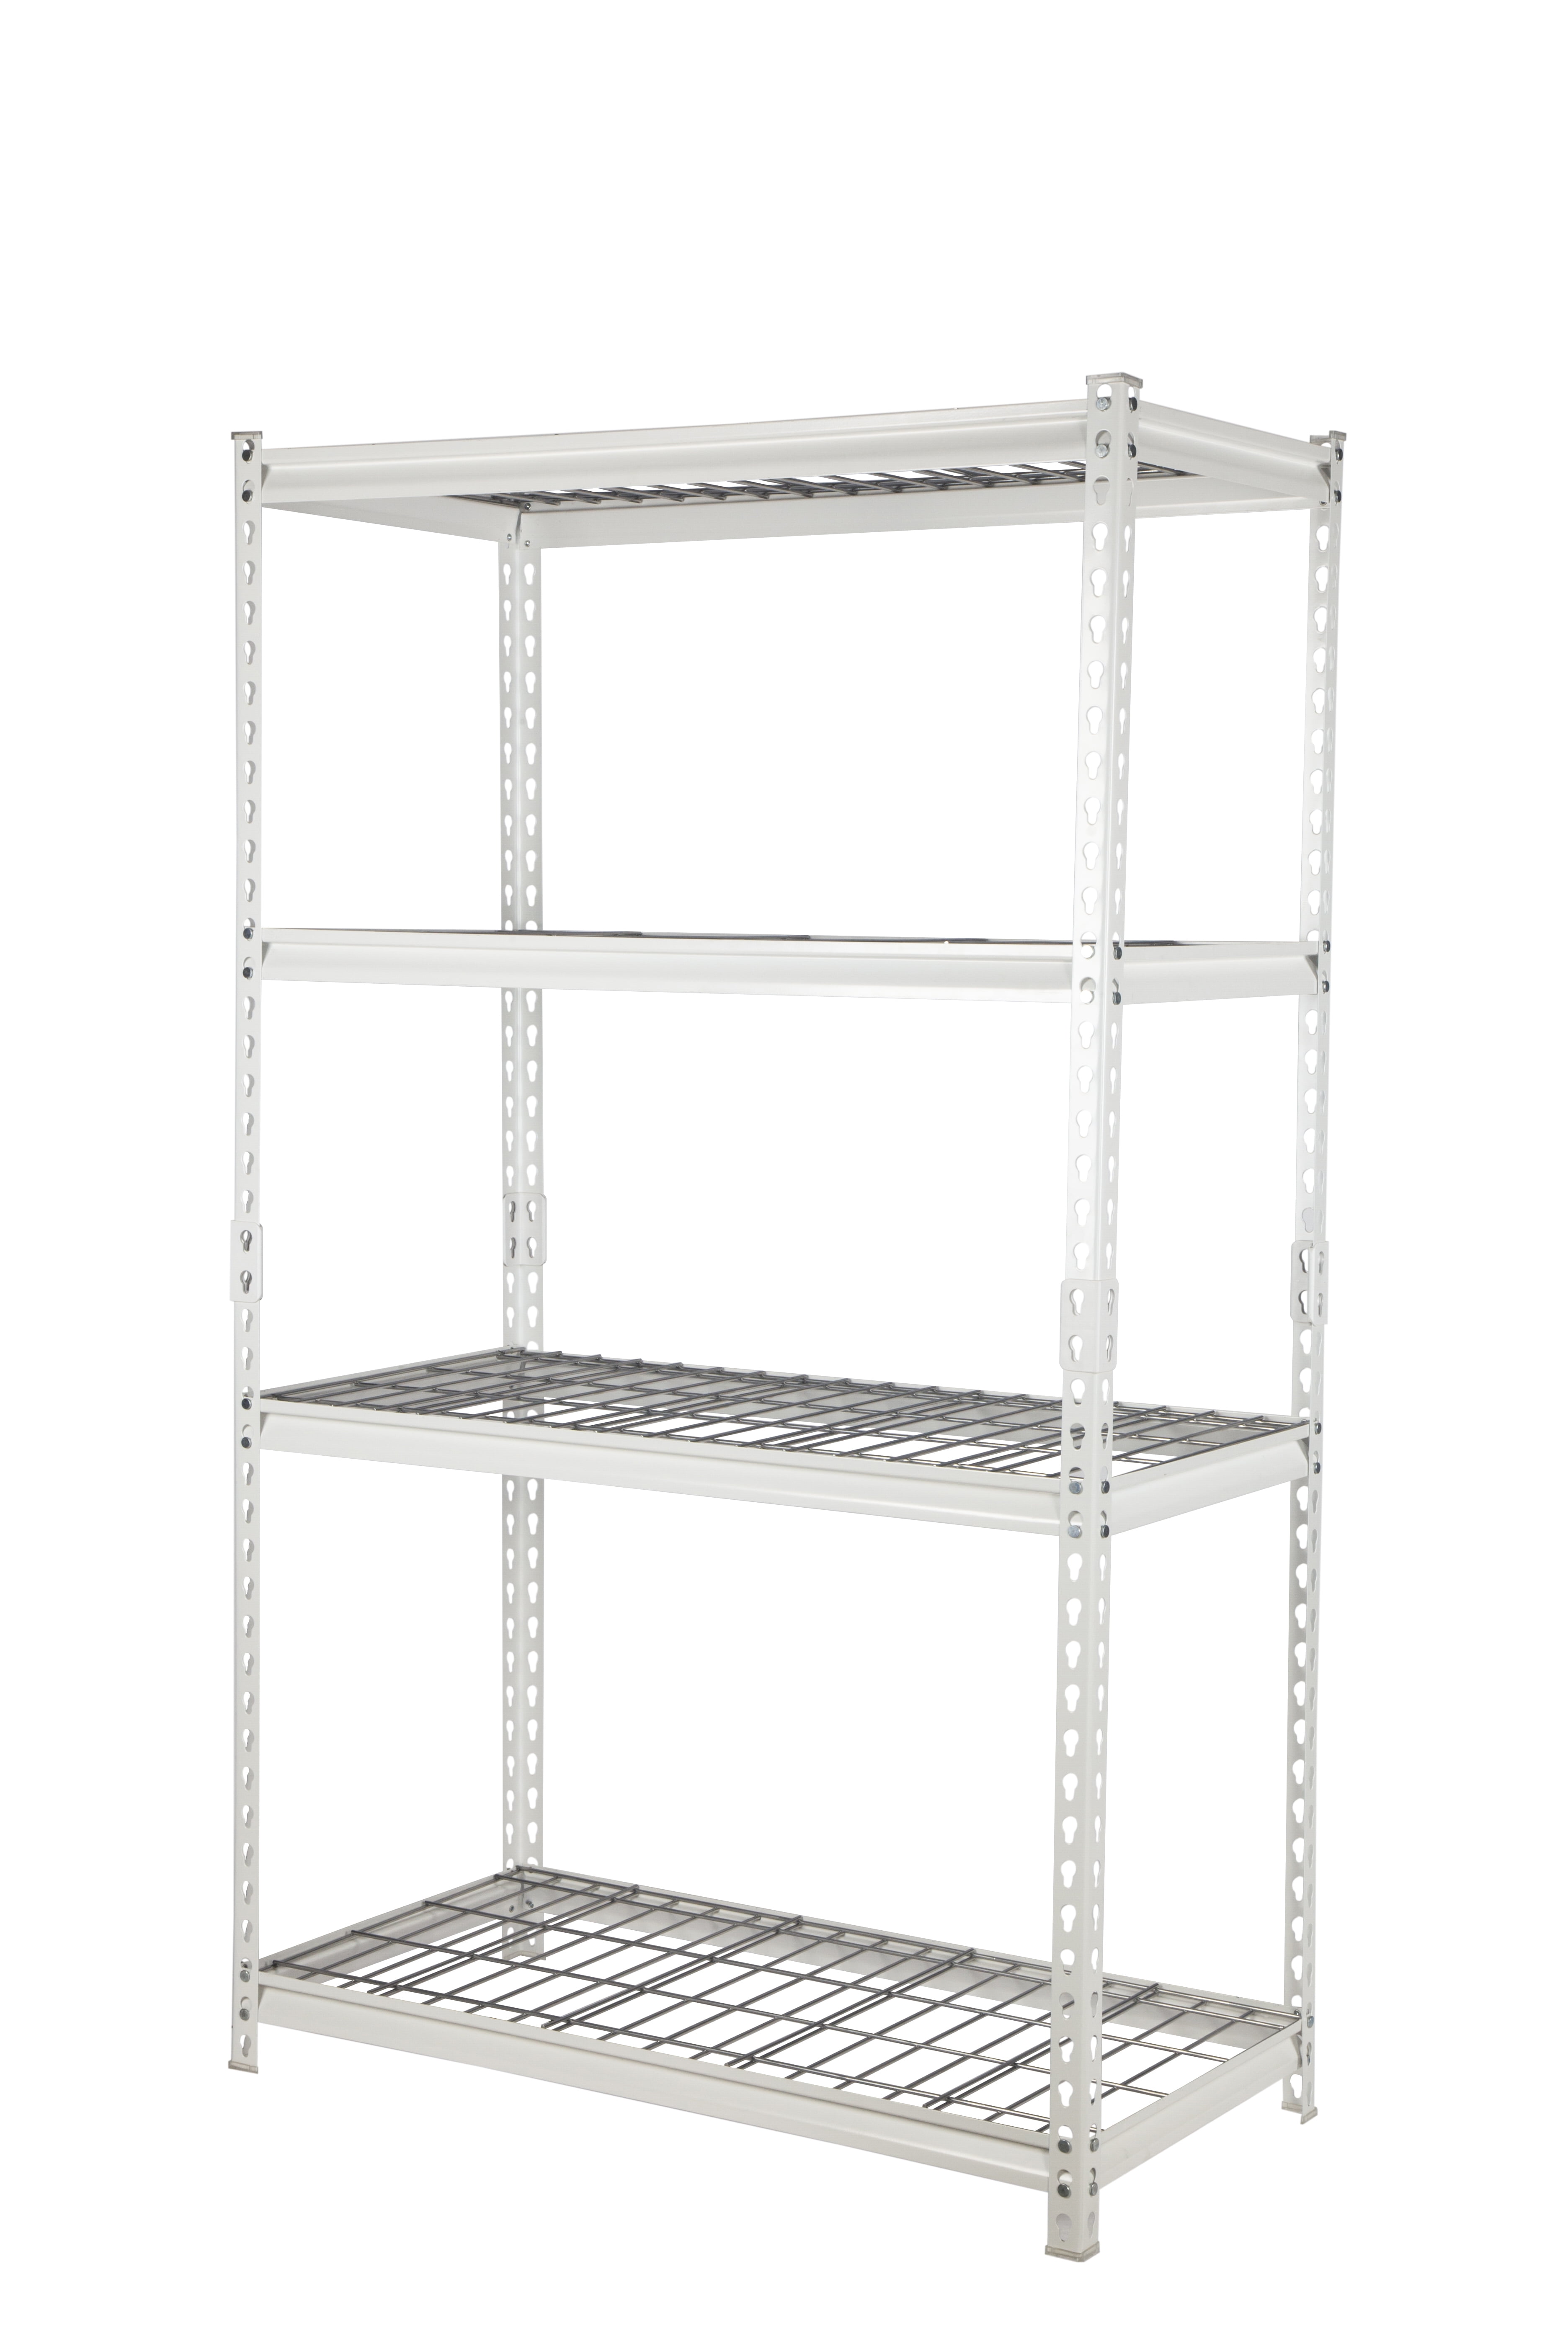 Pachira 36W x 18D x 60H Adjustable Height 4-Shelf Steel Shelving Unit  Utility Organizer Rack for Home, Office, and Warehouse, White